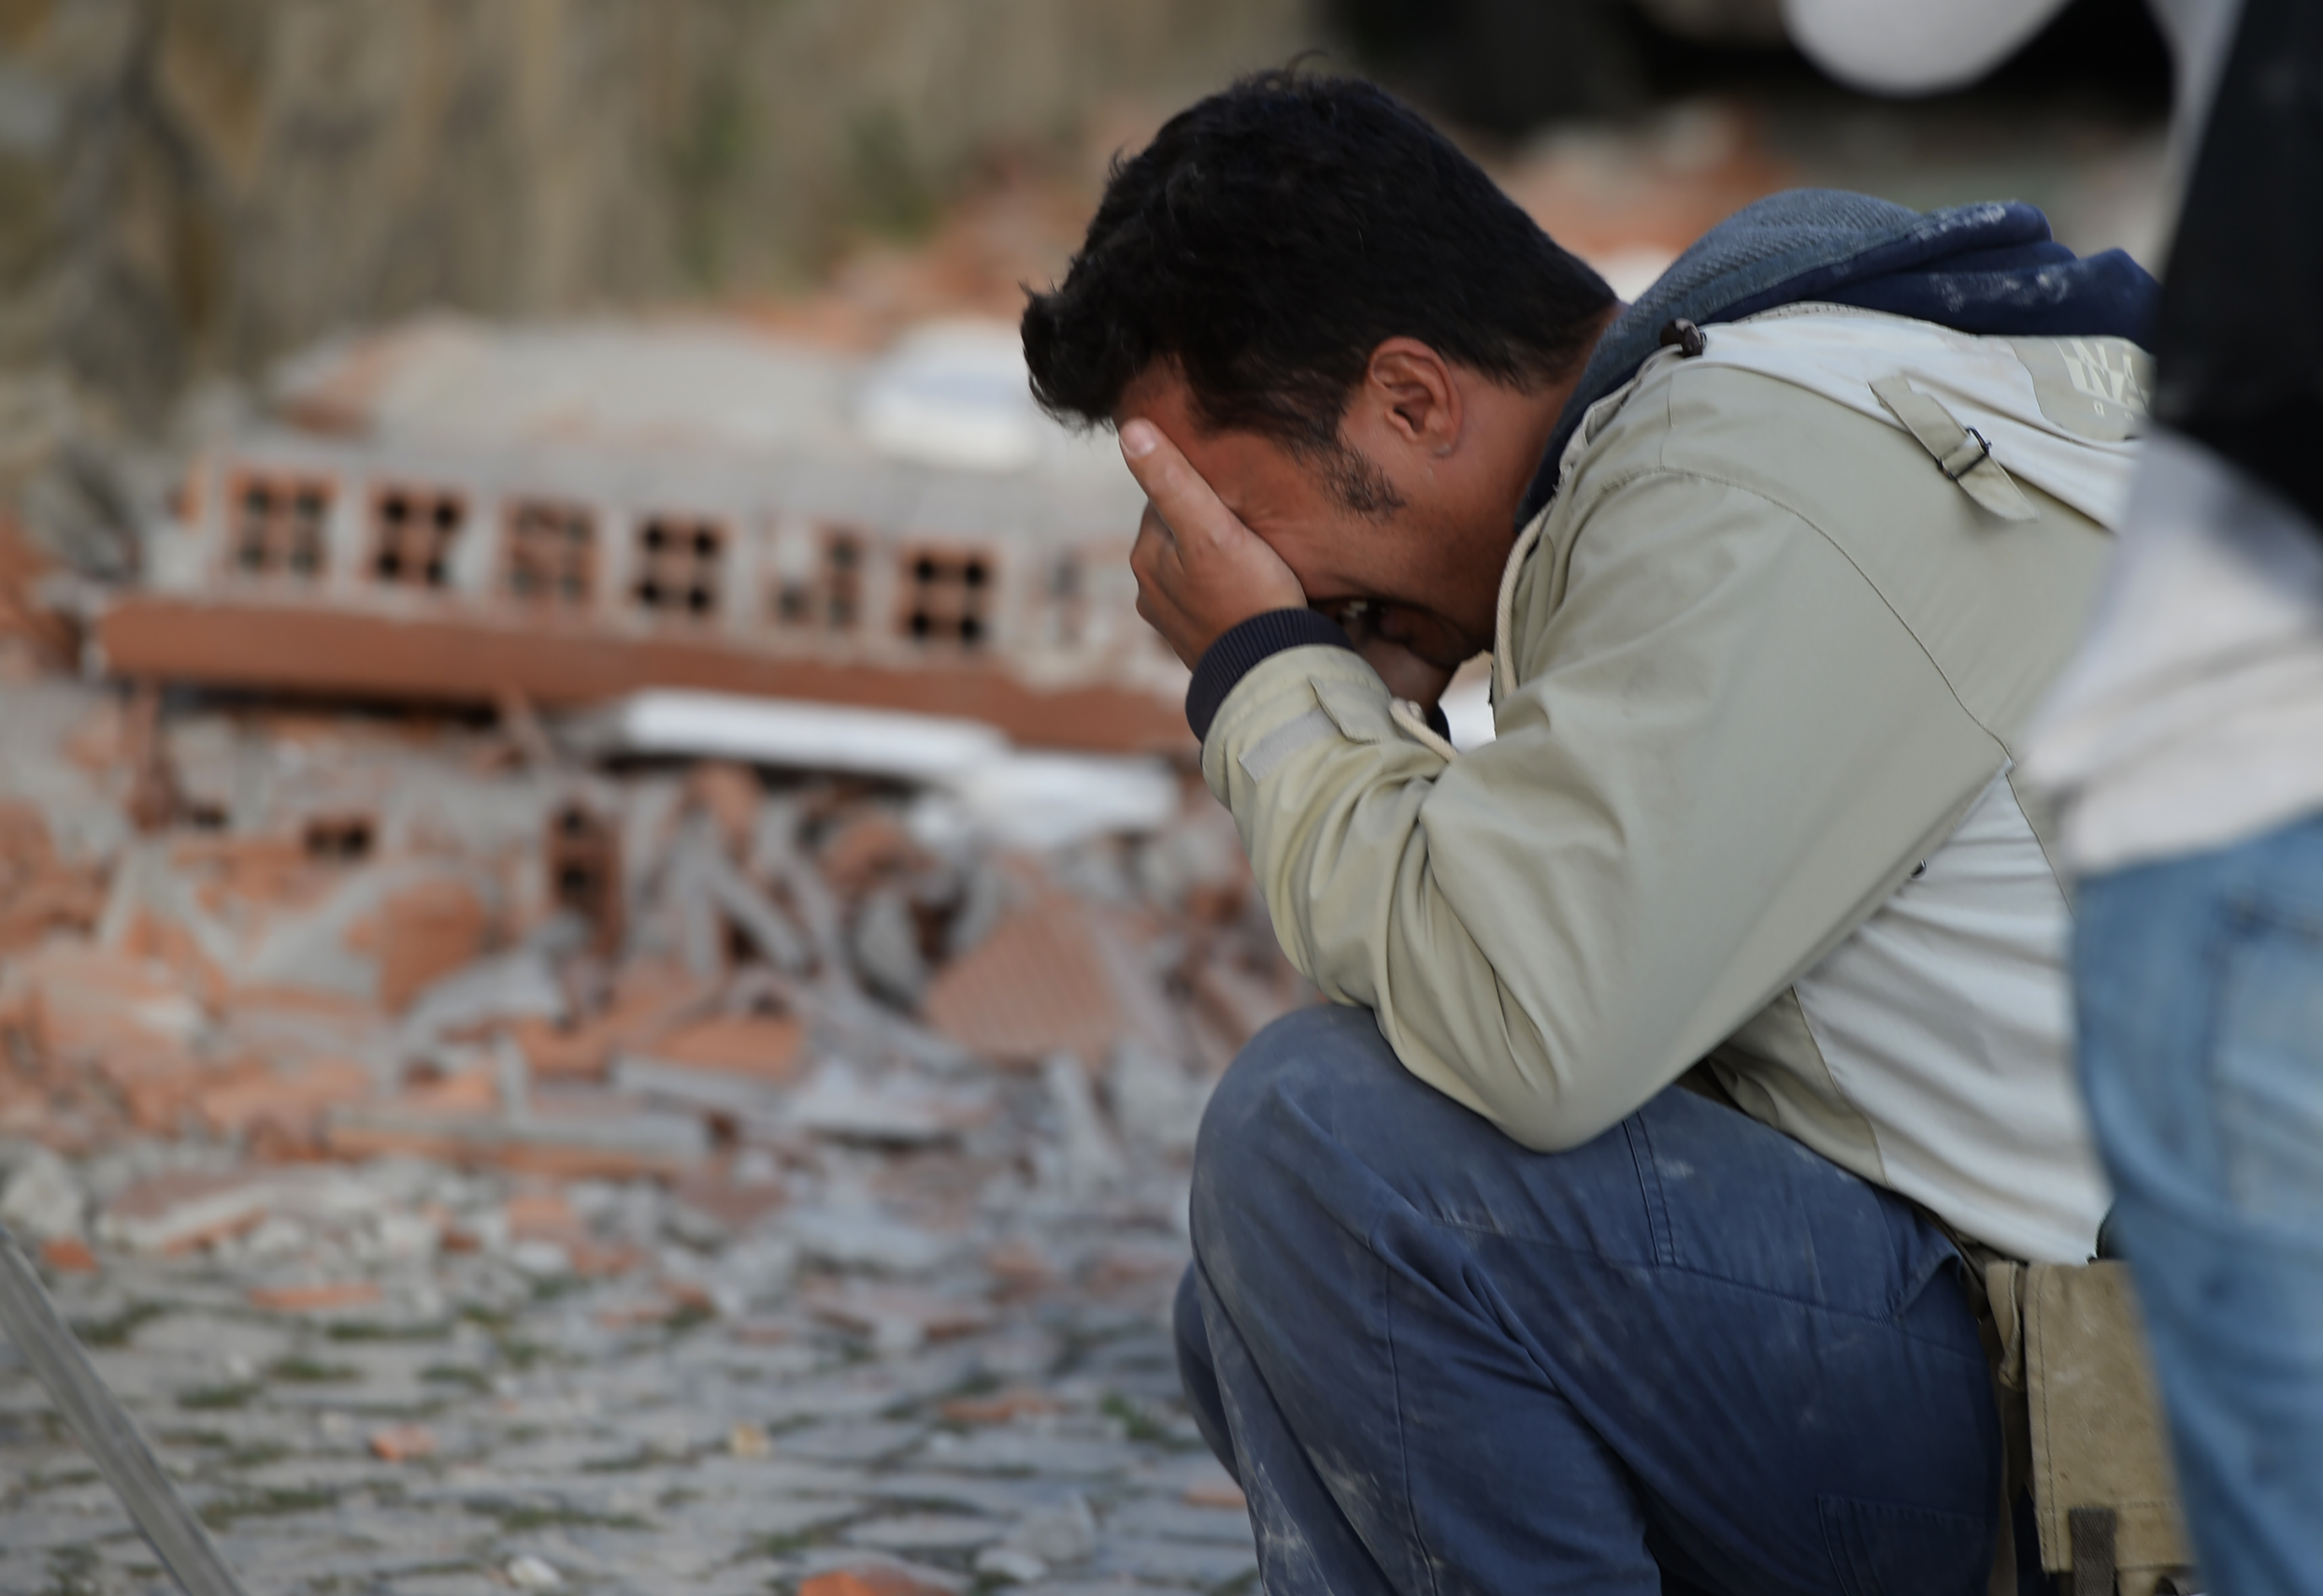 A man reacts after a strong heathquake hit Amatrice on August 24, 2016. Central Italy was struck by a powerful, 6.2-magnitude earthquake in the early hours, which has killed at least three people and devastated dozens of mountain villages. Numerous buildings had collapsed in communities close to the epicenter of the quake near the town of Norcia in the region of Umbria, witnesses told Italian media, with an increase in the death toll highly likely. / AFP PHOTO / FILIPPO MONTEFORTE